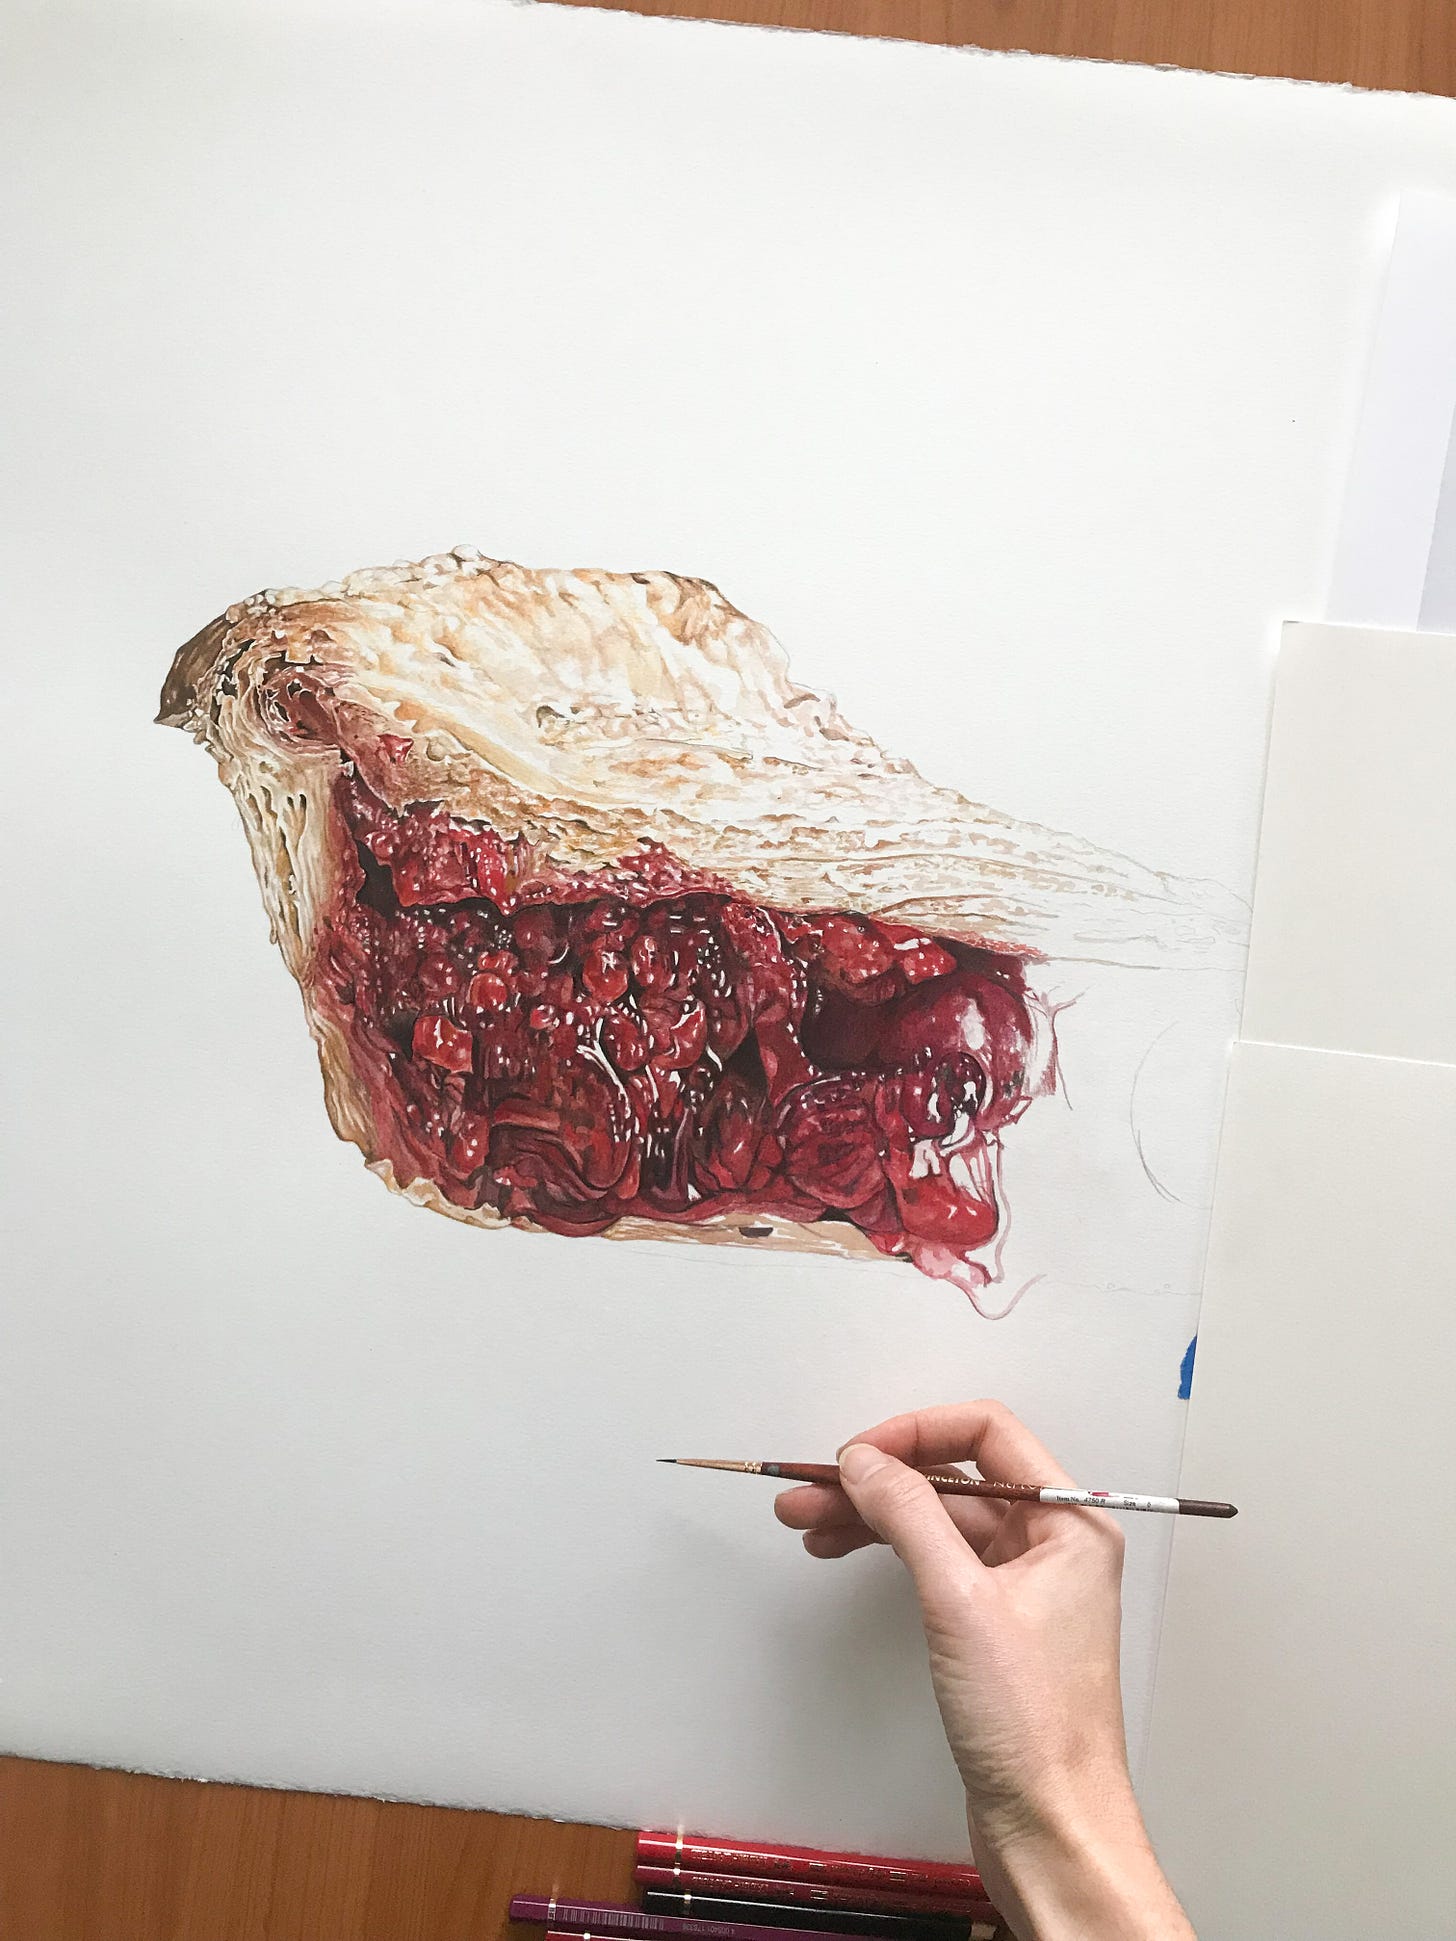 A birdseye view of the cherry pie painting, mid painting, with my hand in the bottom corner with a paintbrush. You can see the pencil lines below the pie, and where the paint is layered